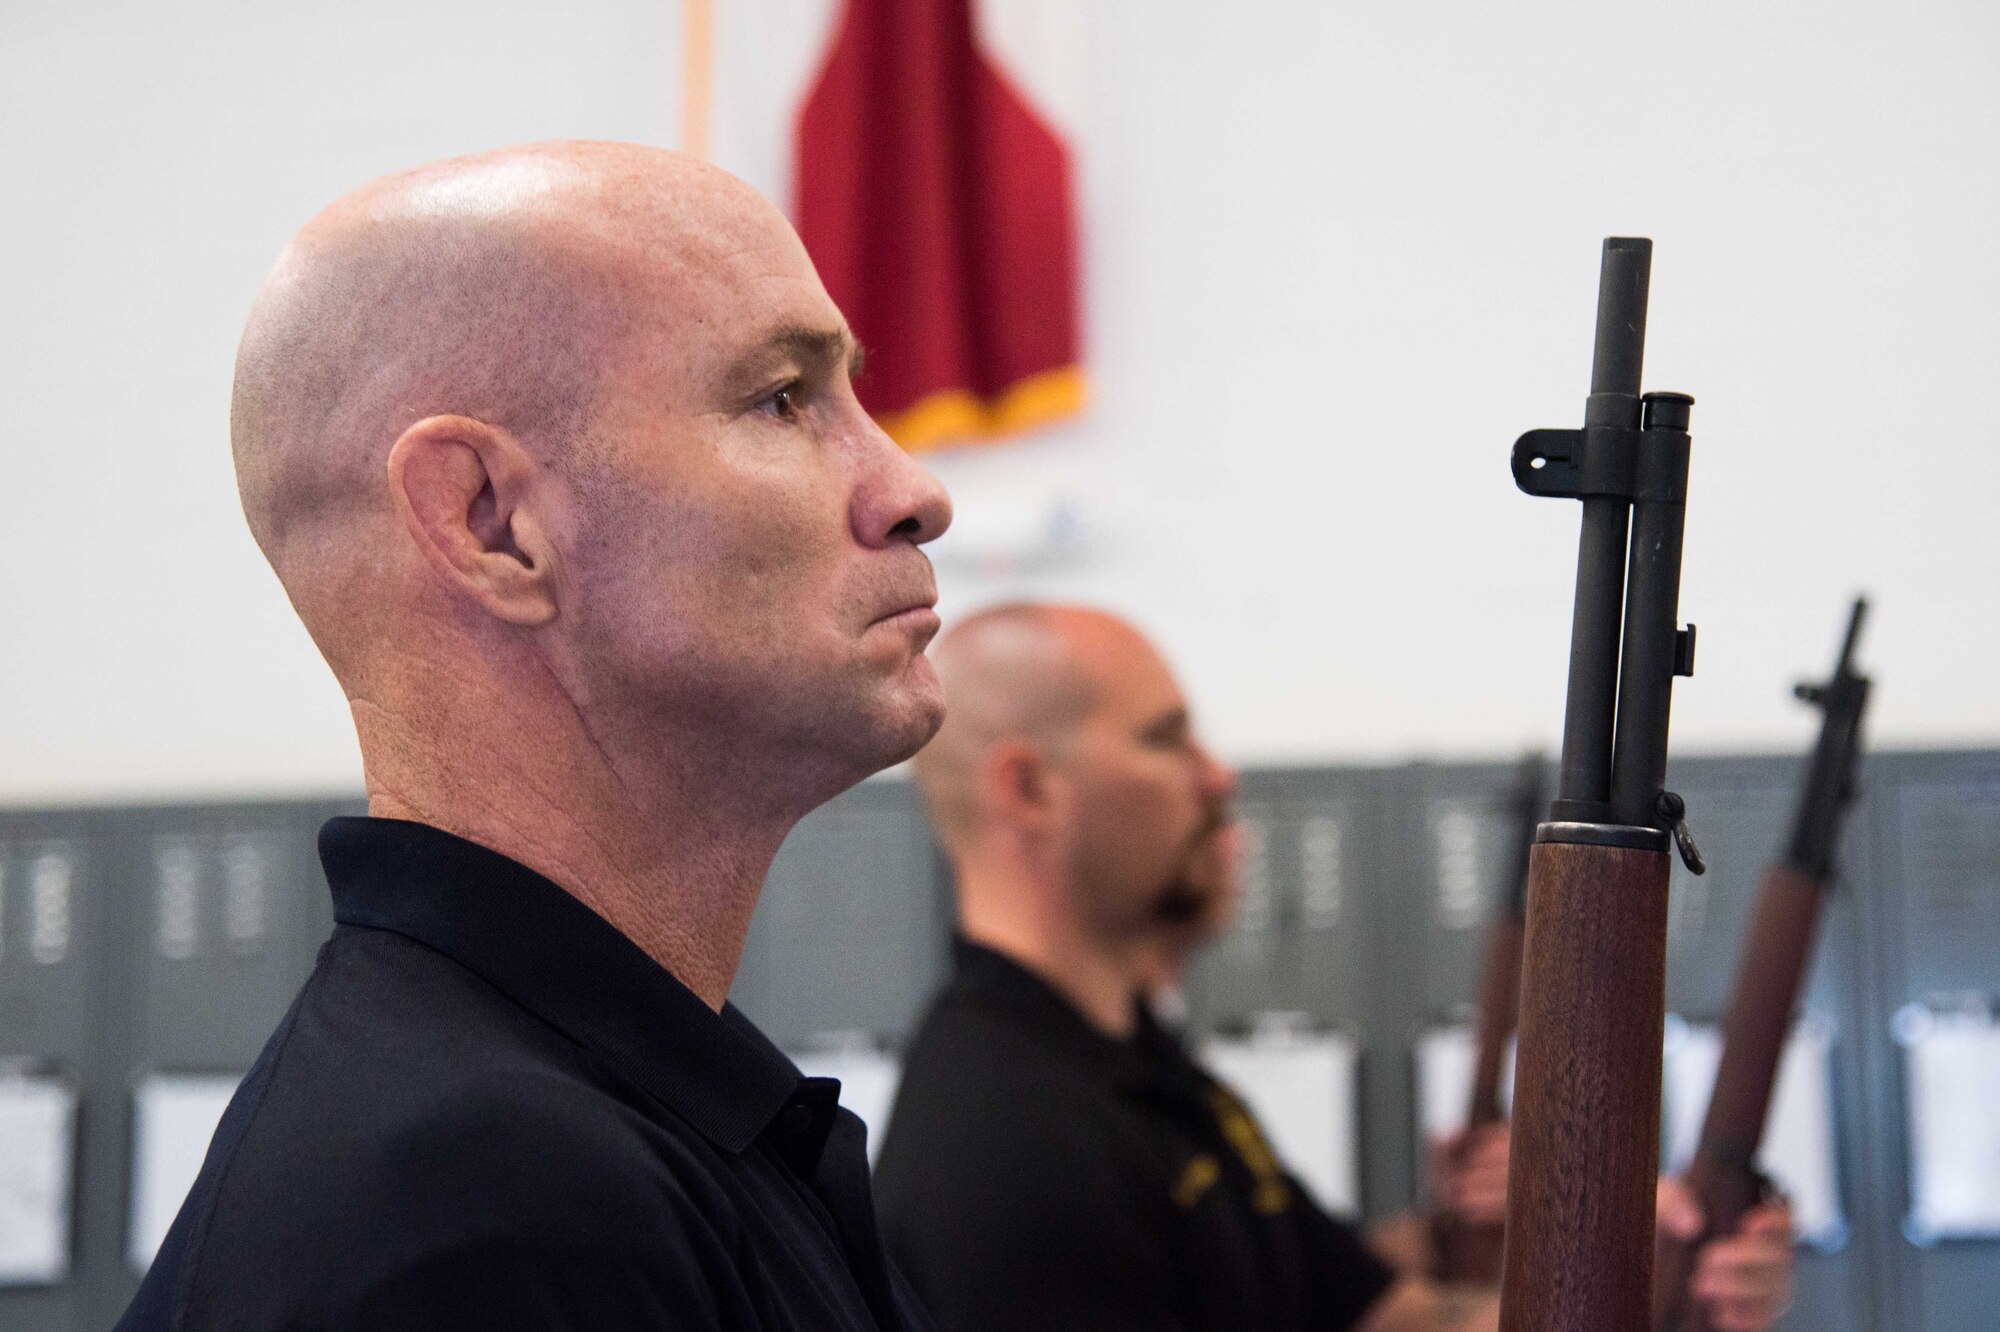 Deputy Eric Dietrich, Sedgwick County honor guardsman, practices rifle team training June 30, 2021, at McConnell Air Force Base, Kansas. Members from both the Wichita City Police and Sedgwick County Honor Guards spent a day learning Air Force honor guard ceremonial customs. (U.S. Air Force photo by Senior Airman Alexi Bosarge)